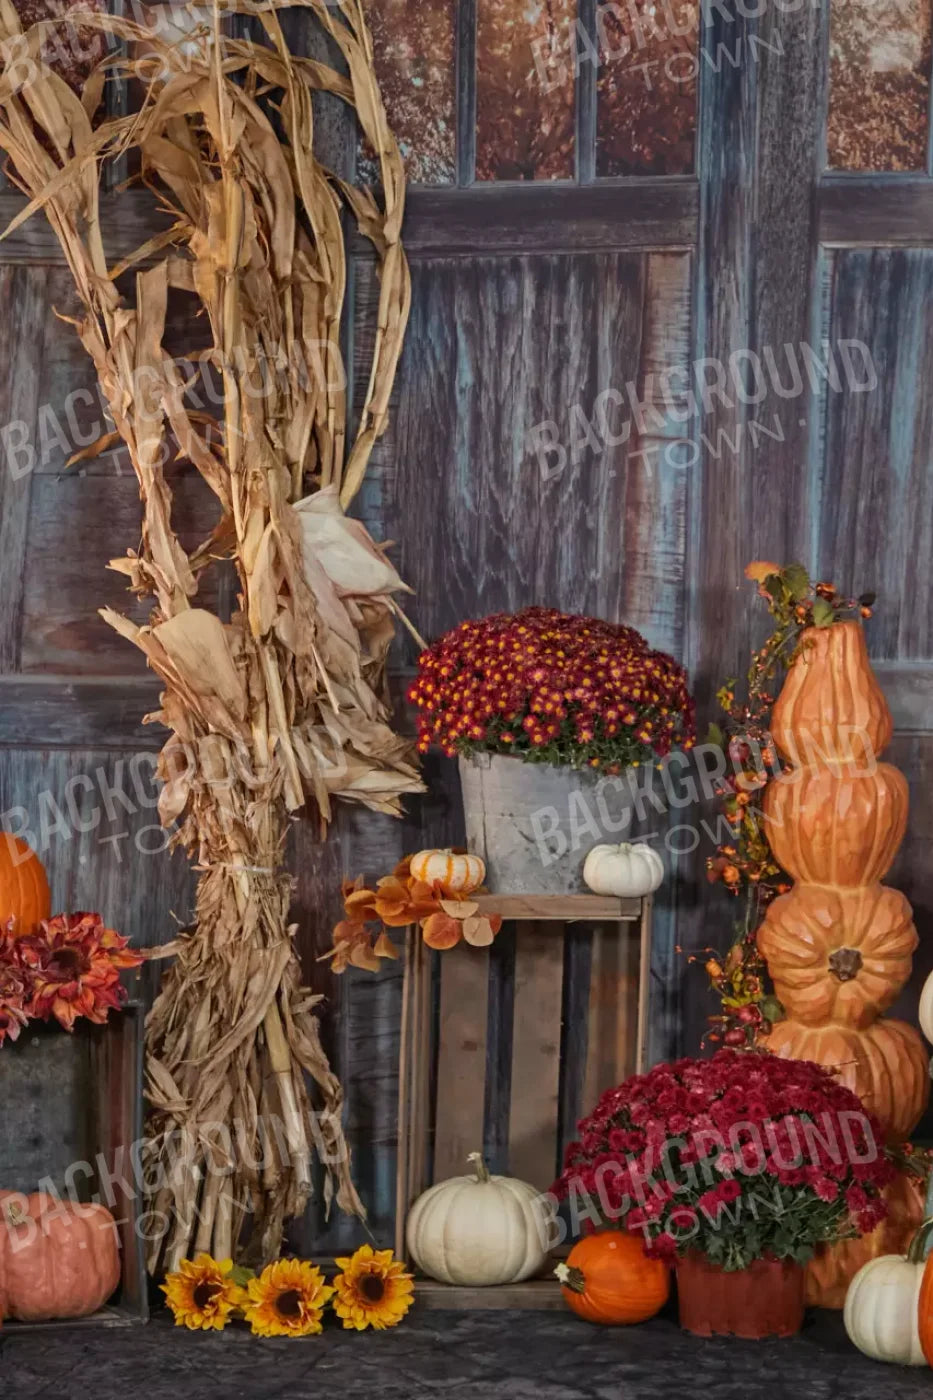 Pumpkin Patch For Lvl Up Backdrop System 5X76 Up ( 60 X 90 Inch )